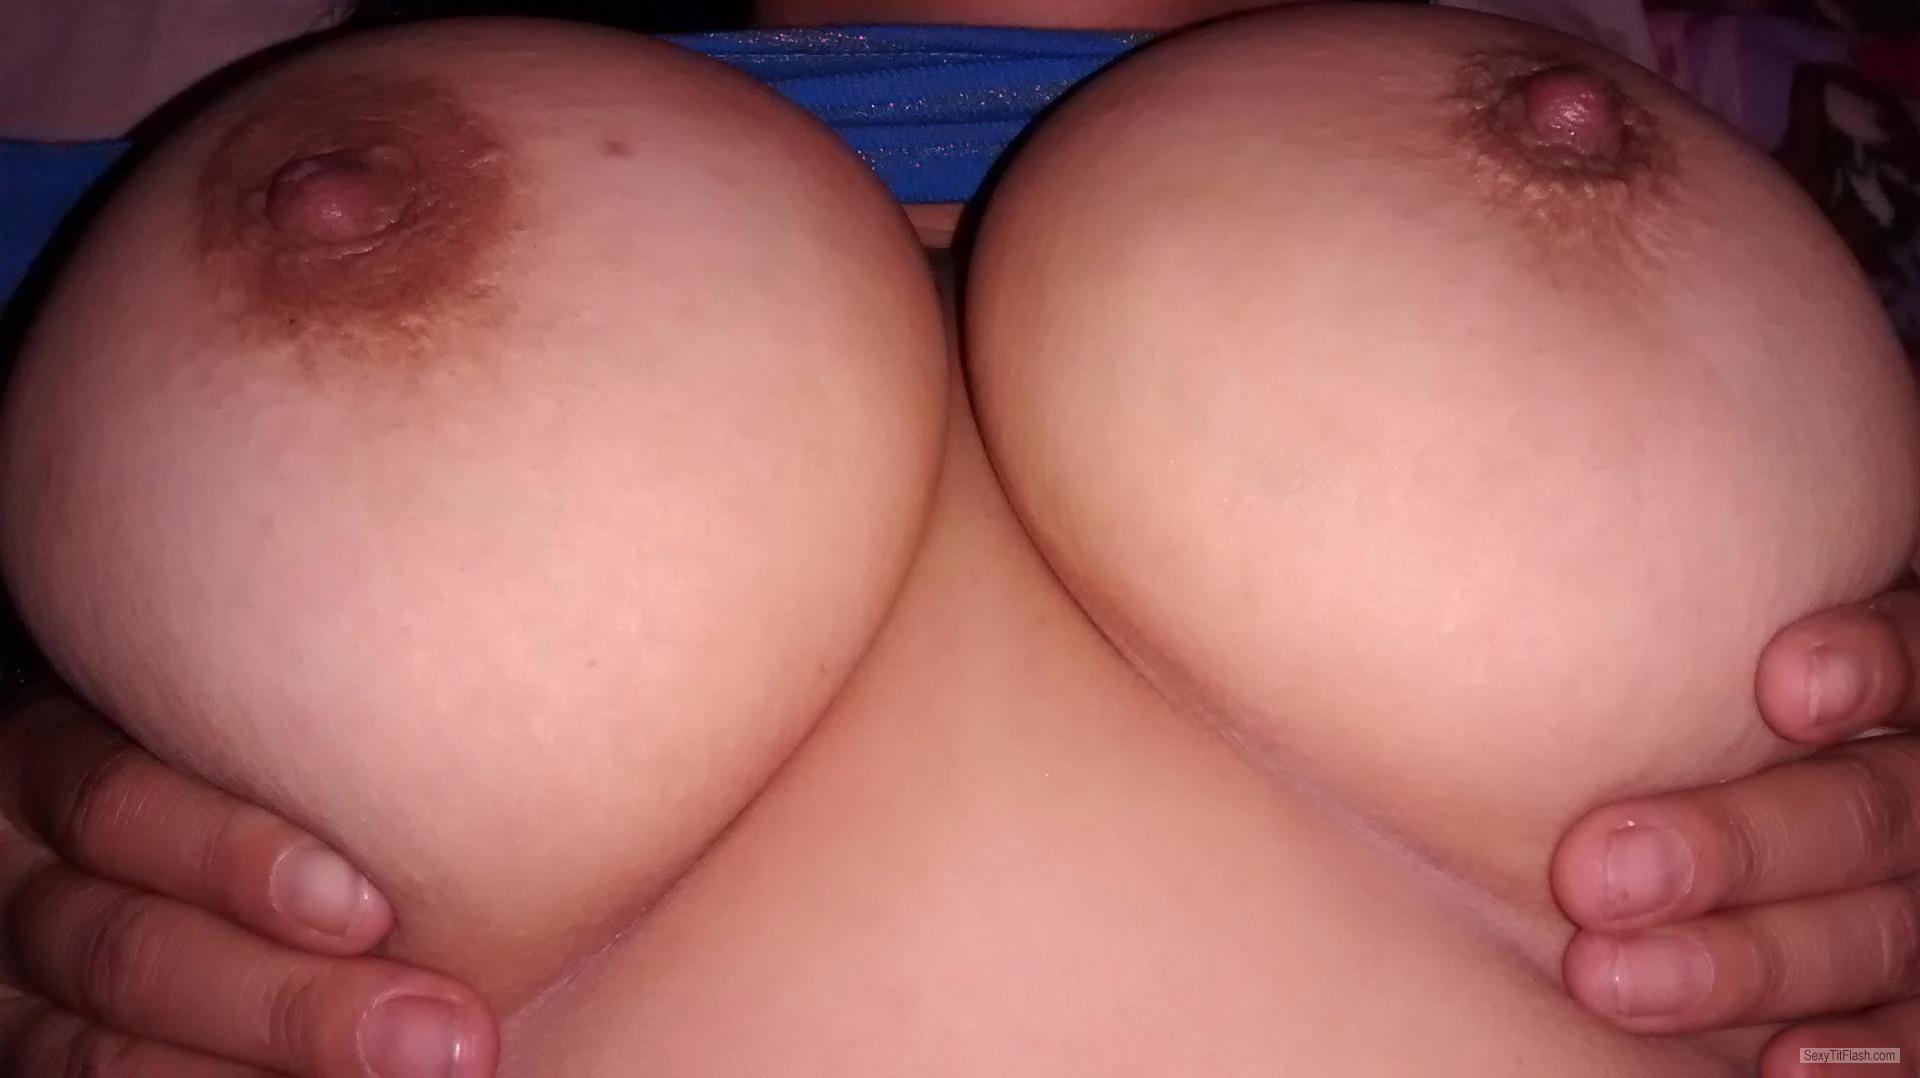 Tit Flash: Girlfriend's Very Small Tits - Topless My GF DDD's from United States